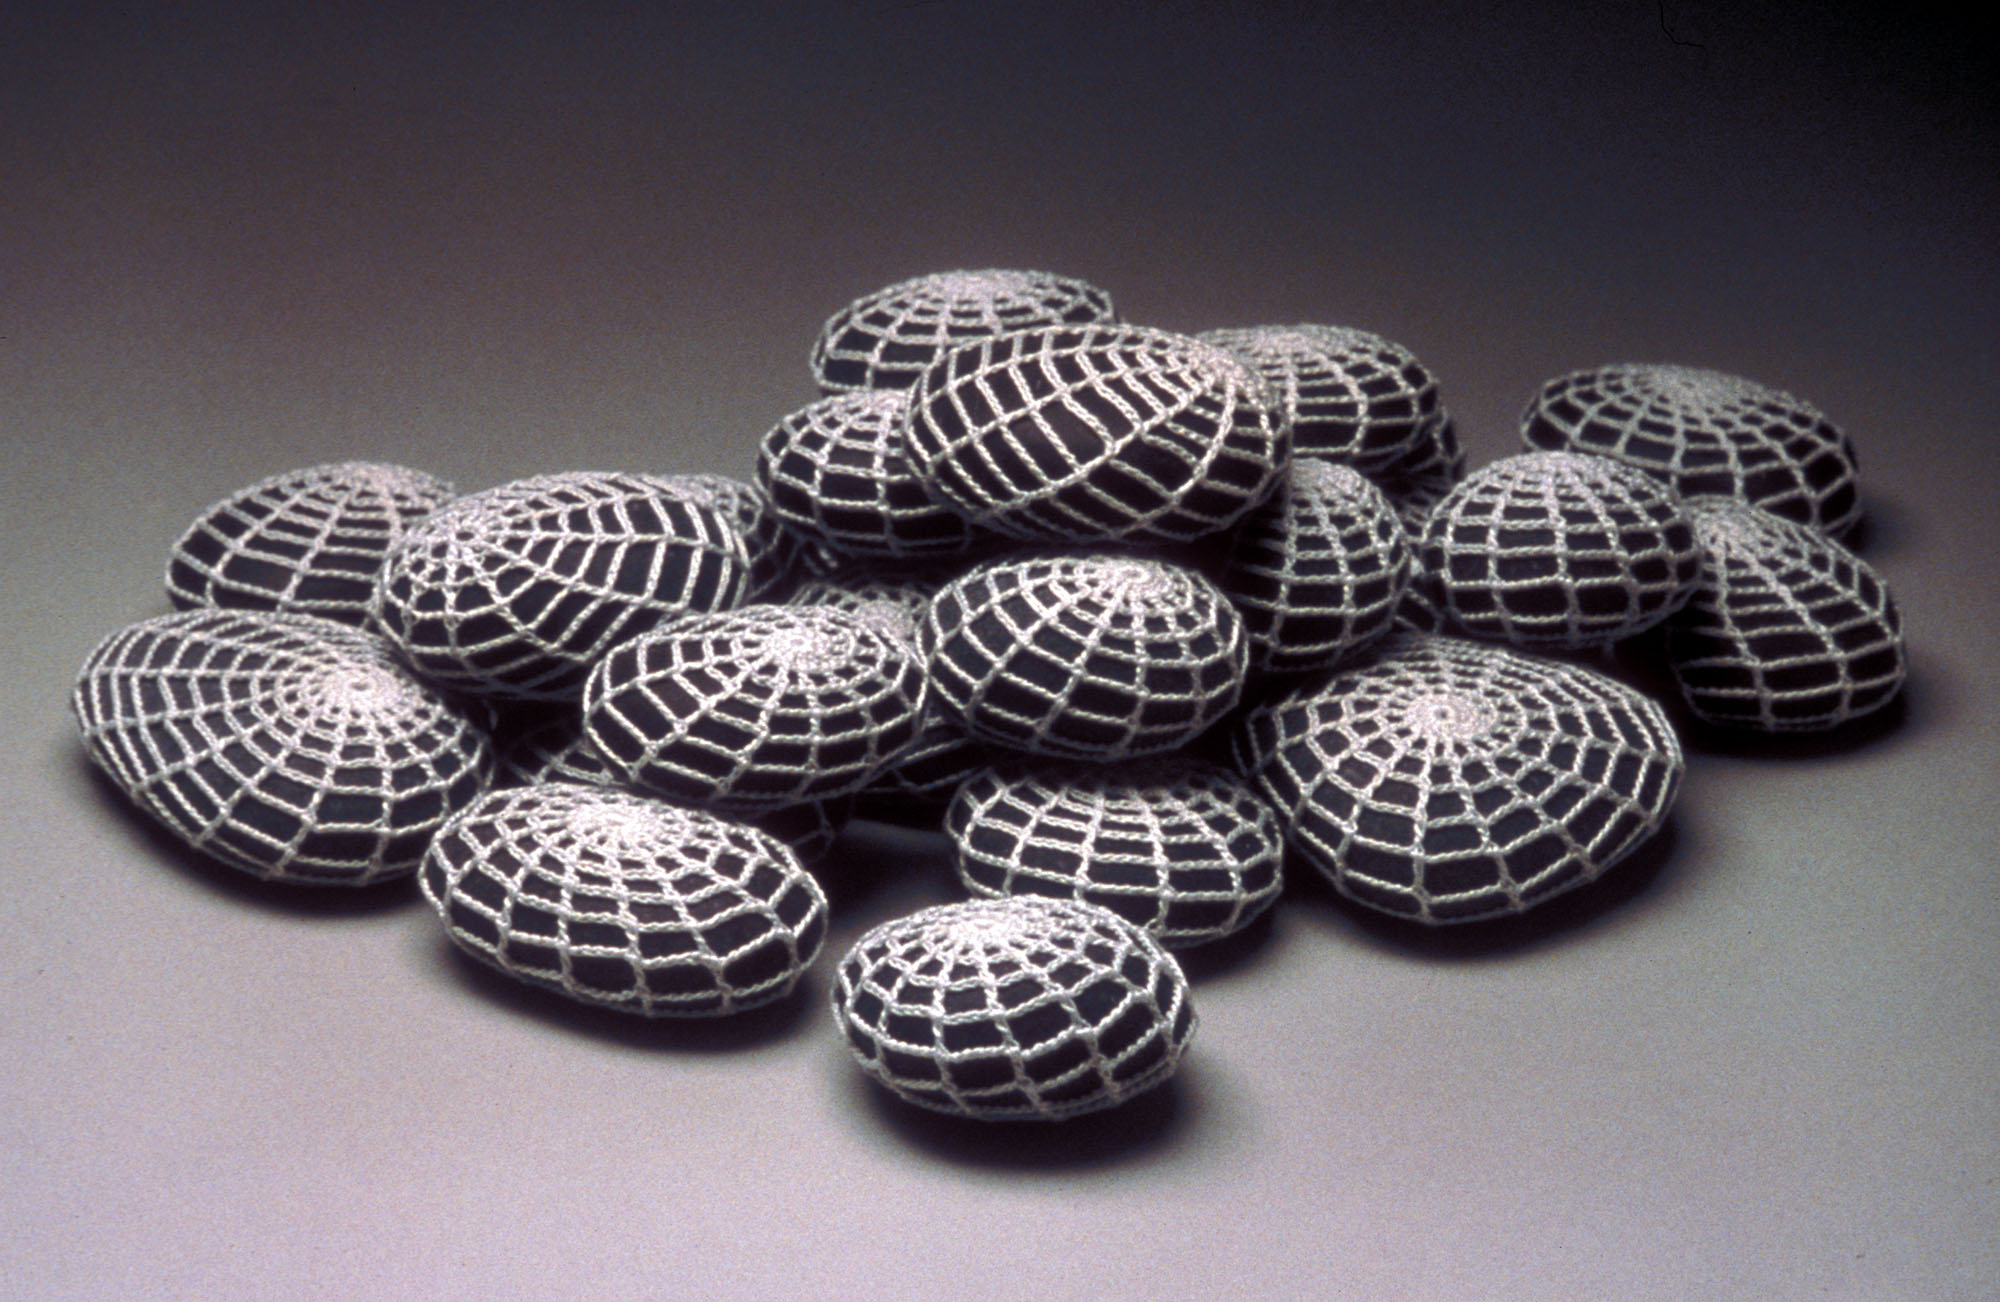 Deborah Valoma, Tears, 2002. River rock and cotton string. Courtesy of the artist.